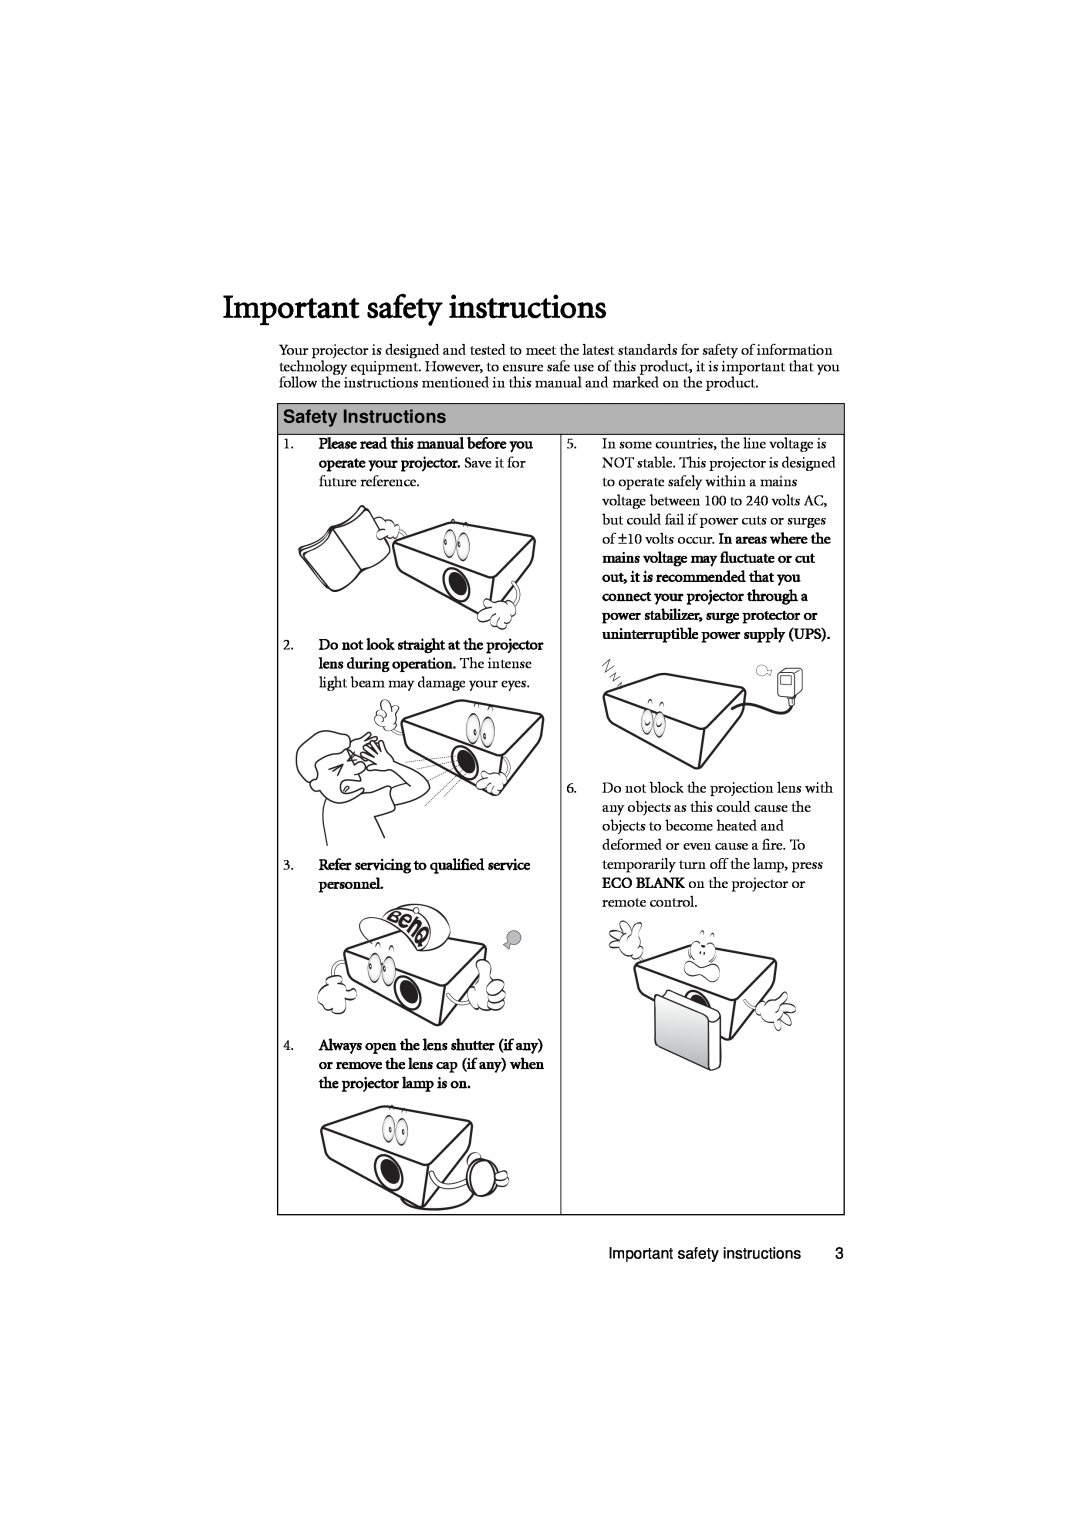 BenQ MX701 user manual Important safety instructions, Safety Instructions 